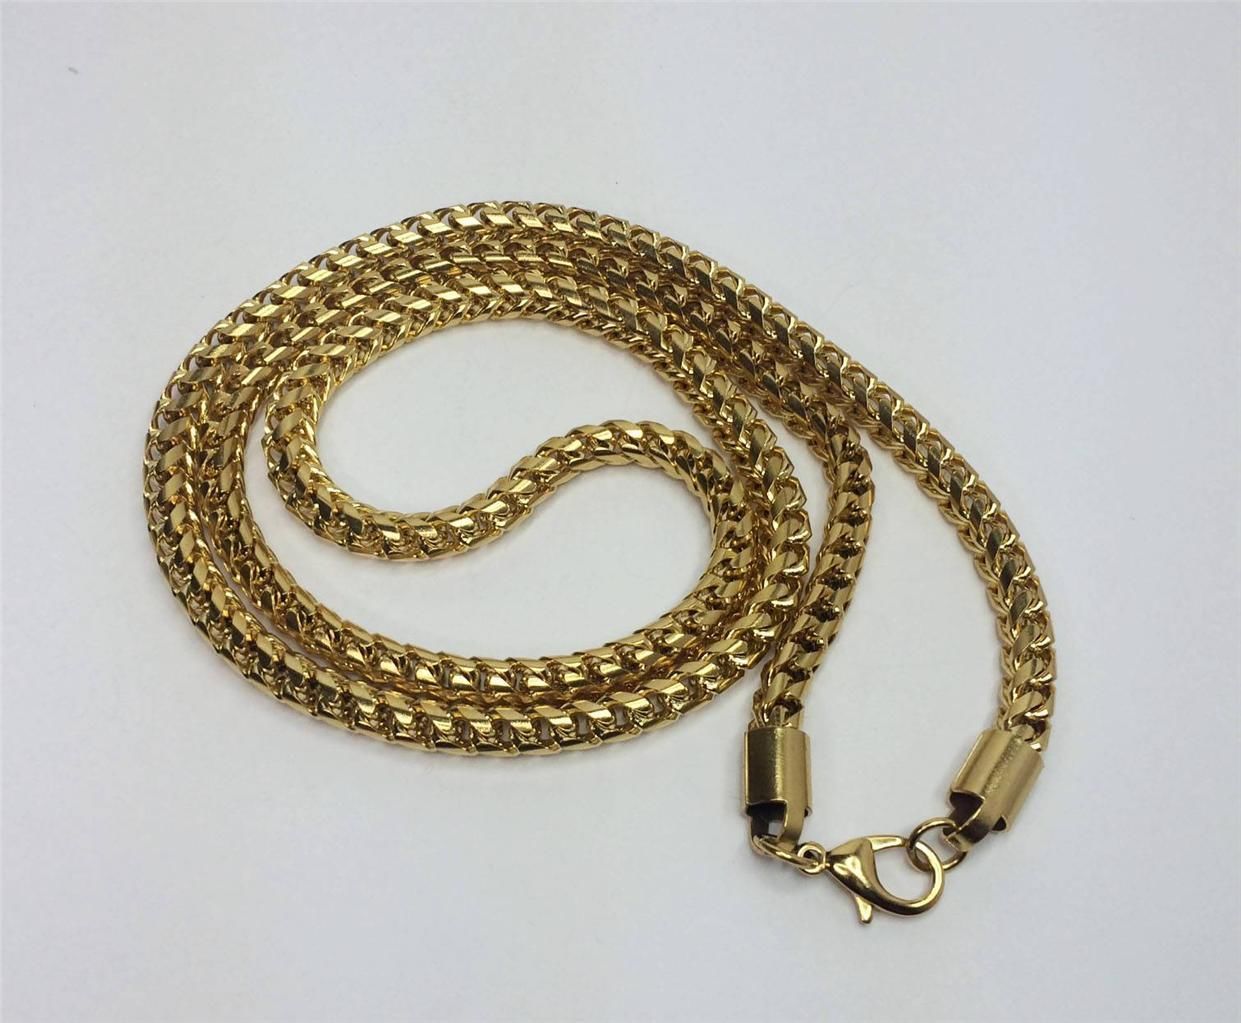 MENS GOLD FRANCO CHAIN NECKLACE 30 INCHES - Necklaces & Pendants